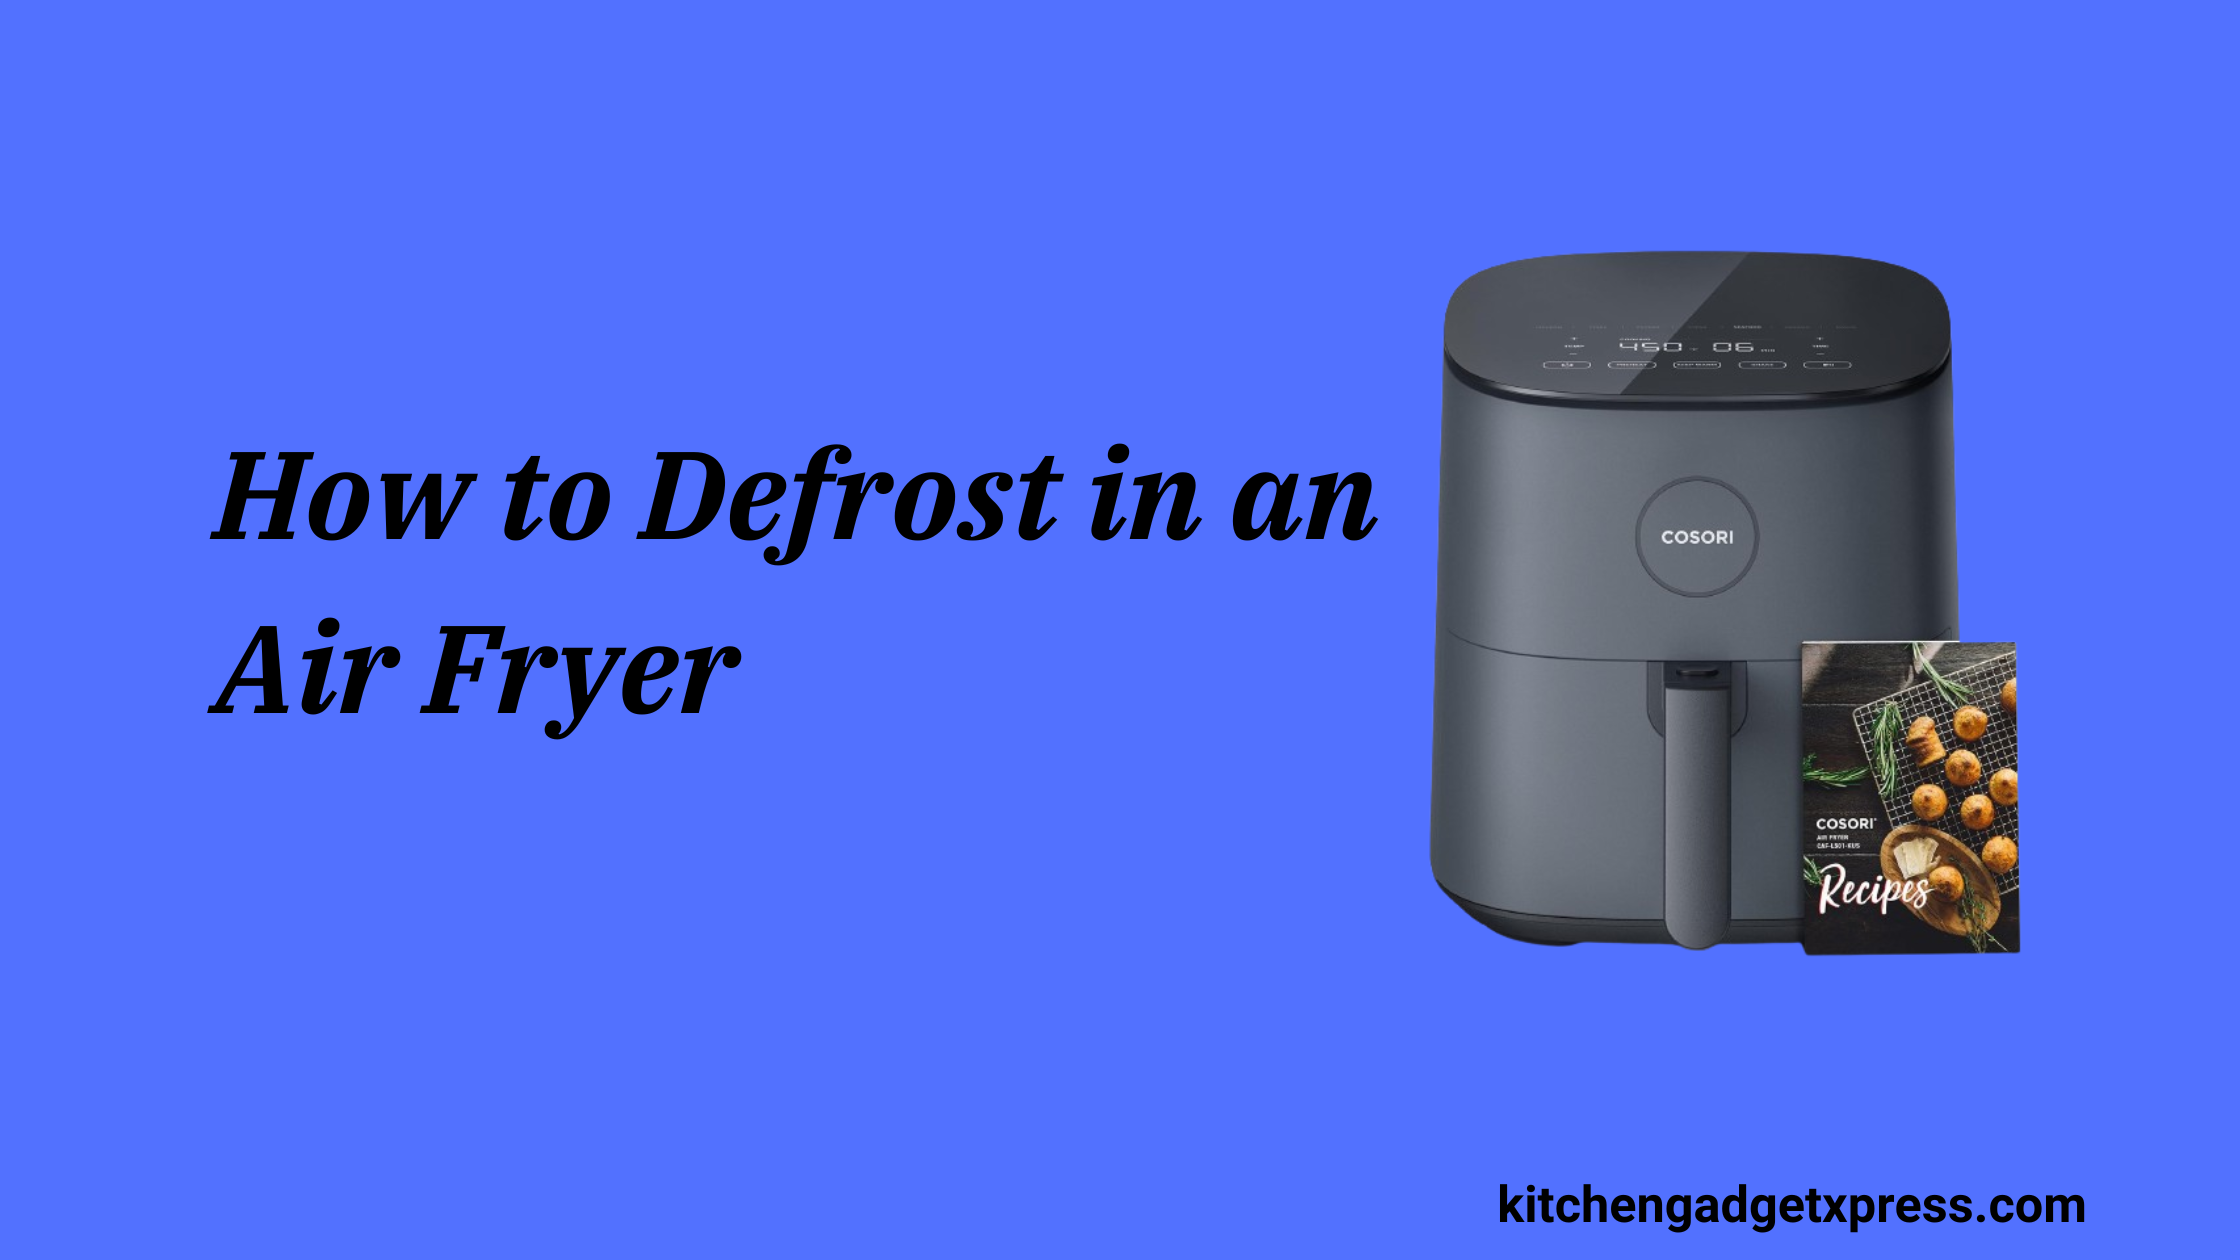 How to Defrost in an Air Fryer